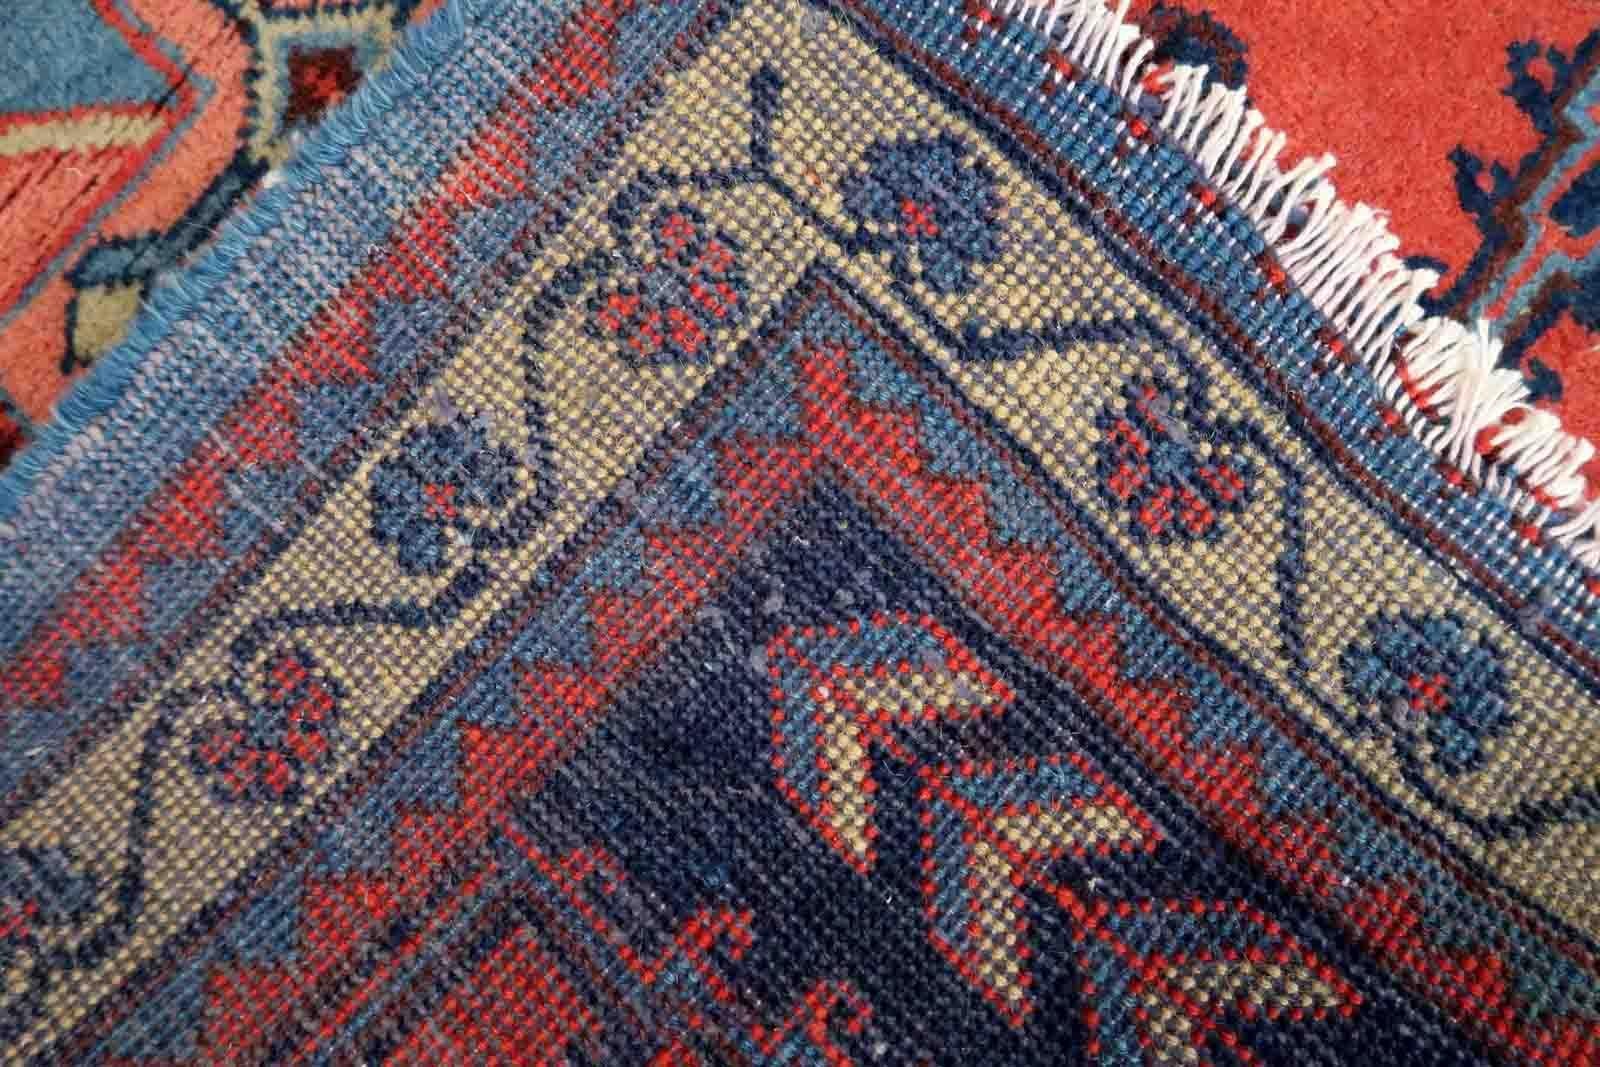 Handmade vintage rug in bright red color from Hamadan region. The rug is from the end of 20th century in original good condition.

-condition: original good,

-circa: 1970s,

-size: 3.5' x 4.8' (109cm x 147cm),

-material: wool,

-country